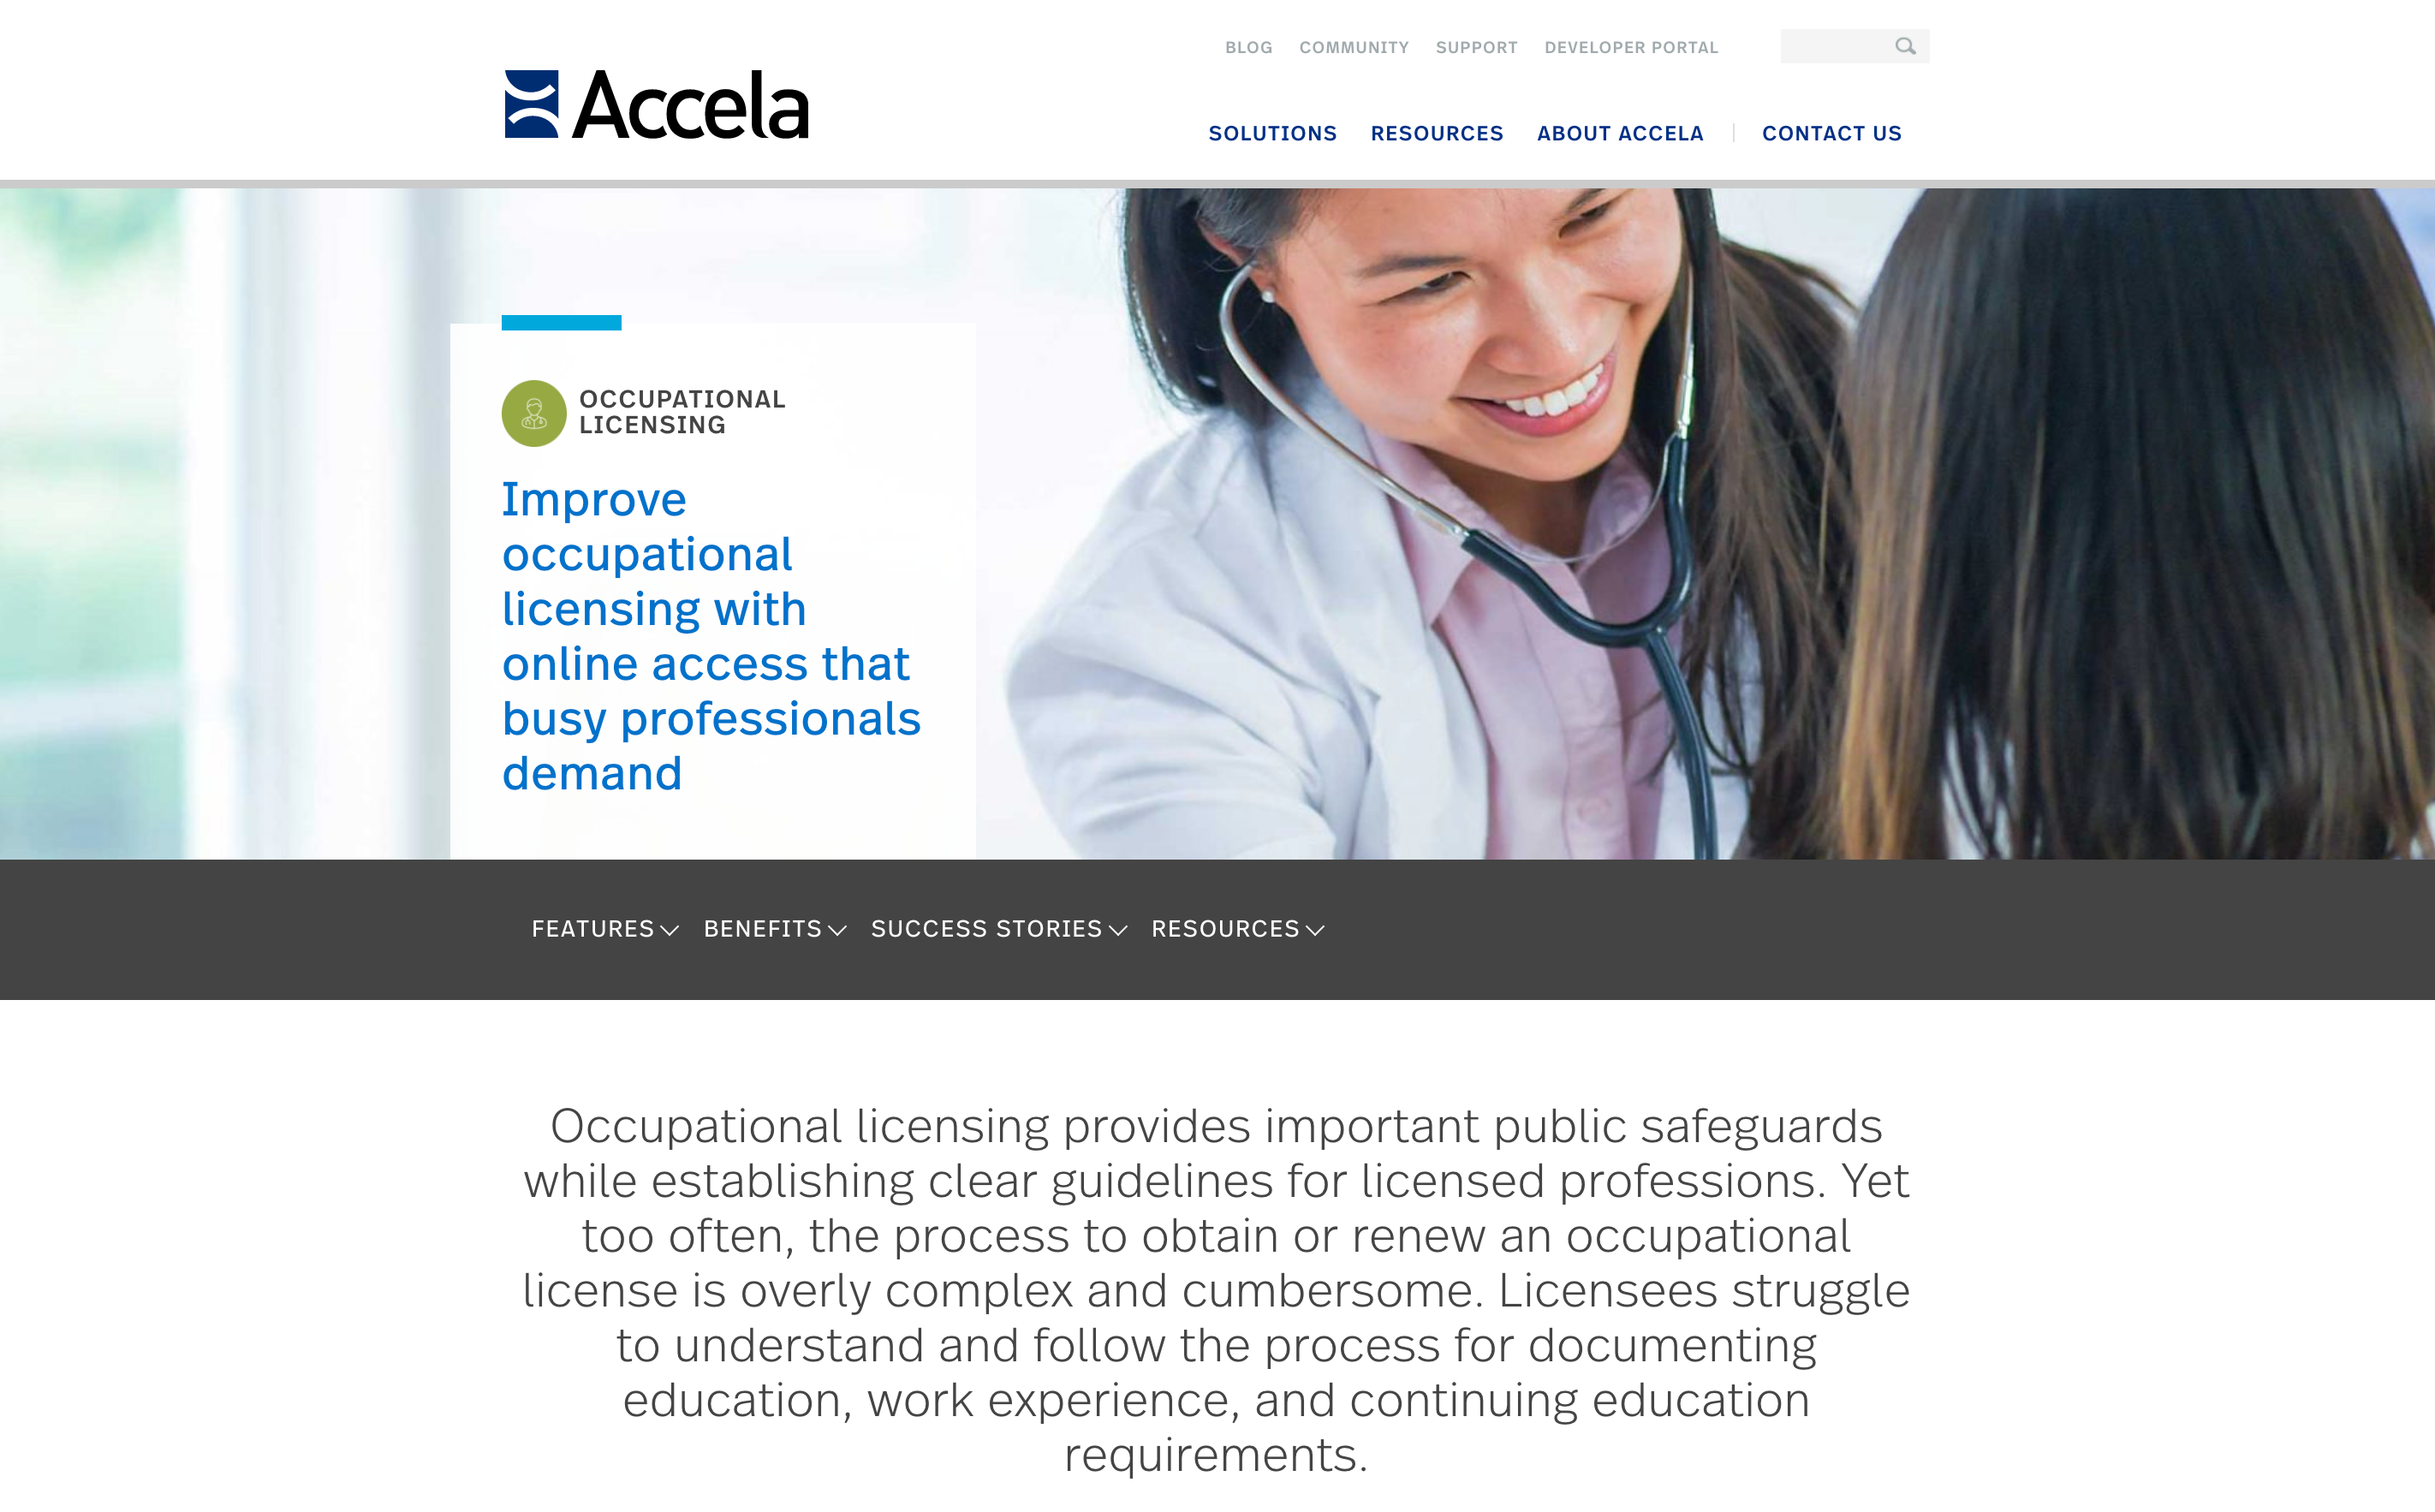 Accela Occupational Licensing Solution